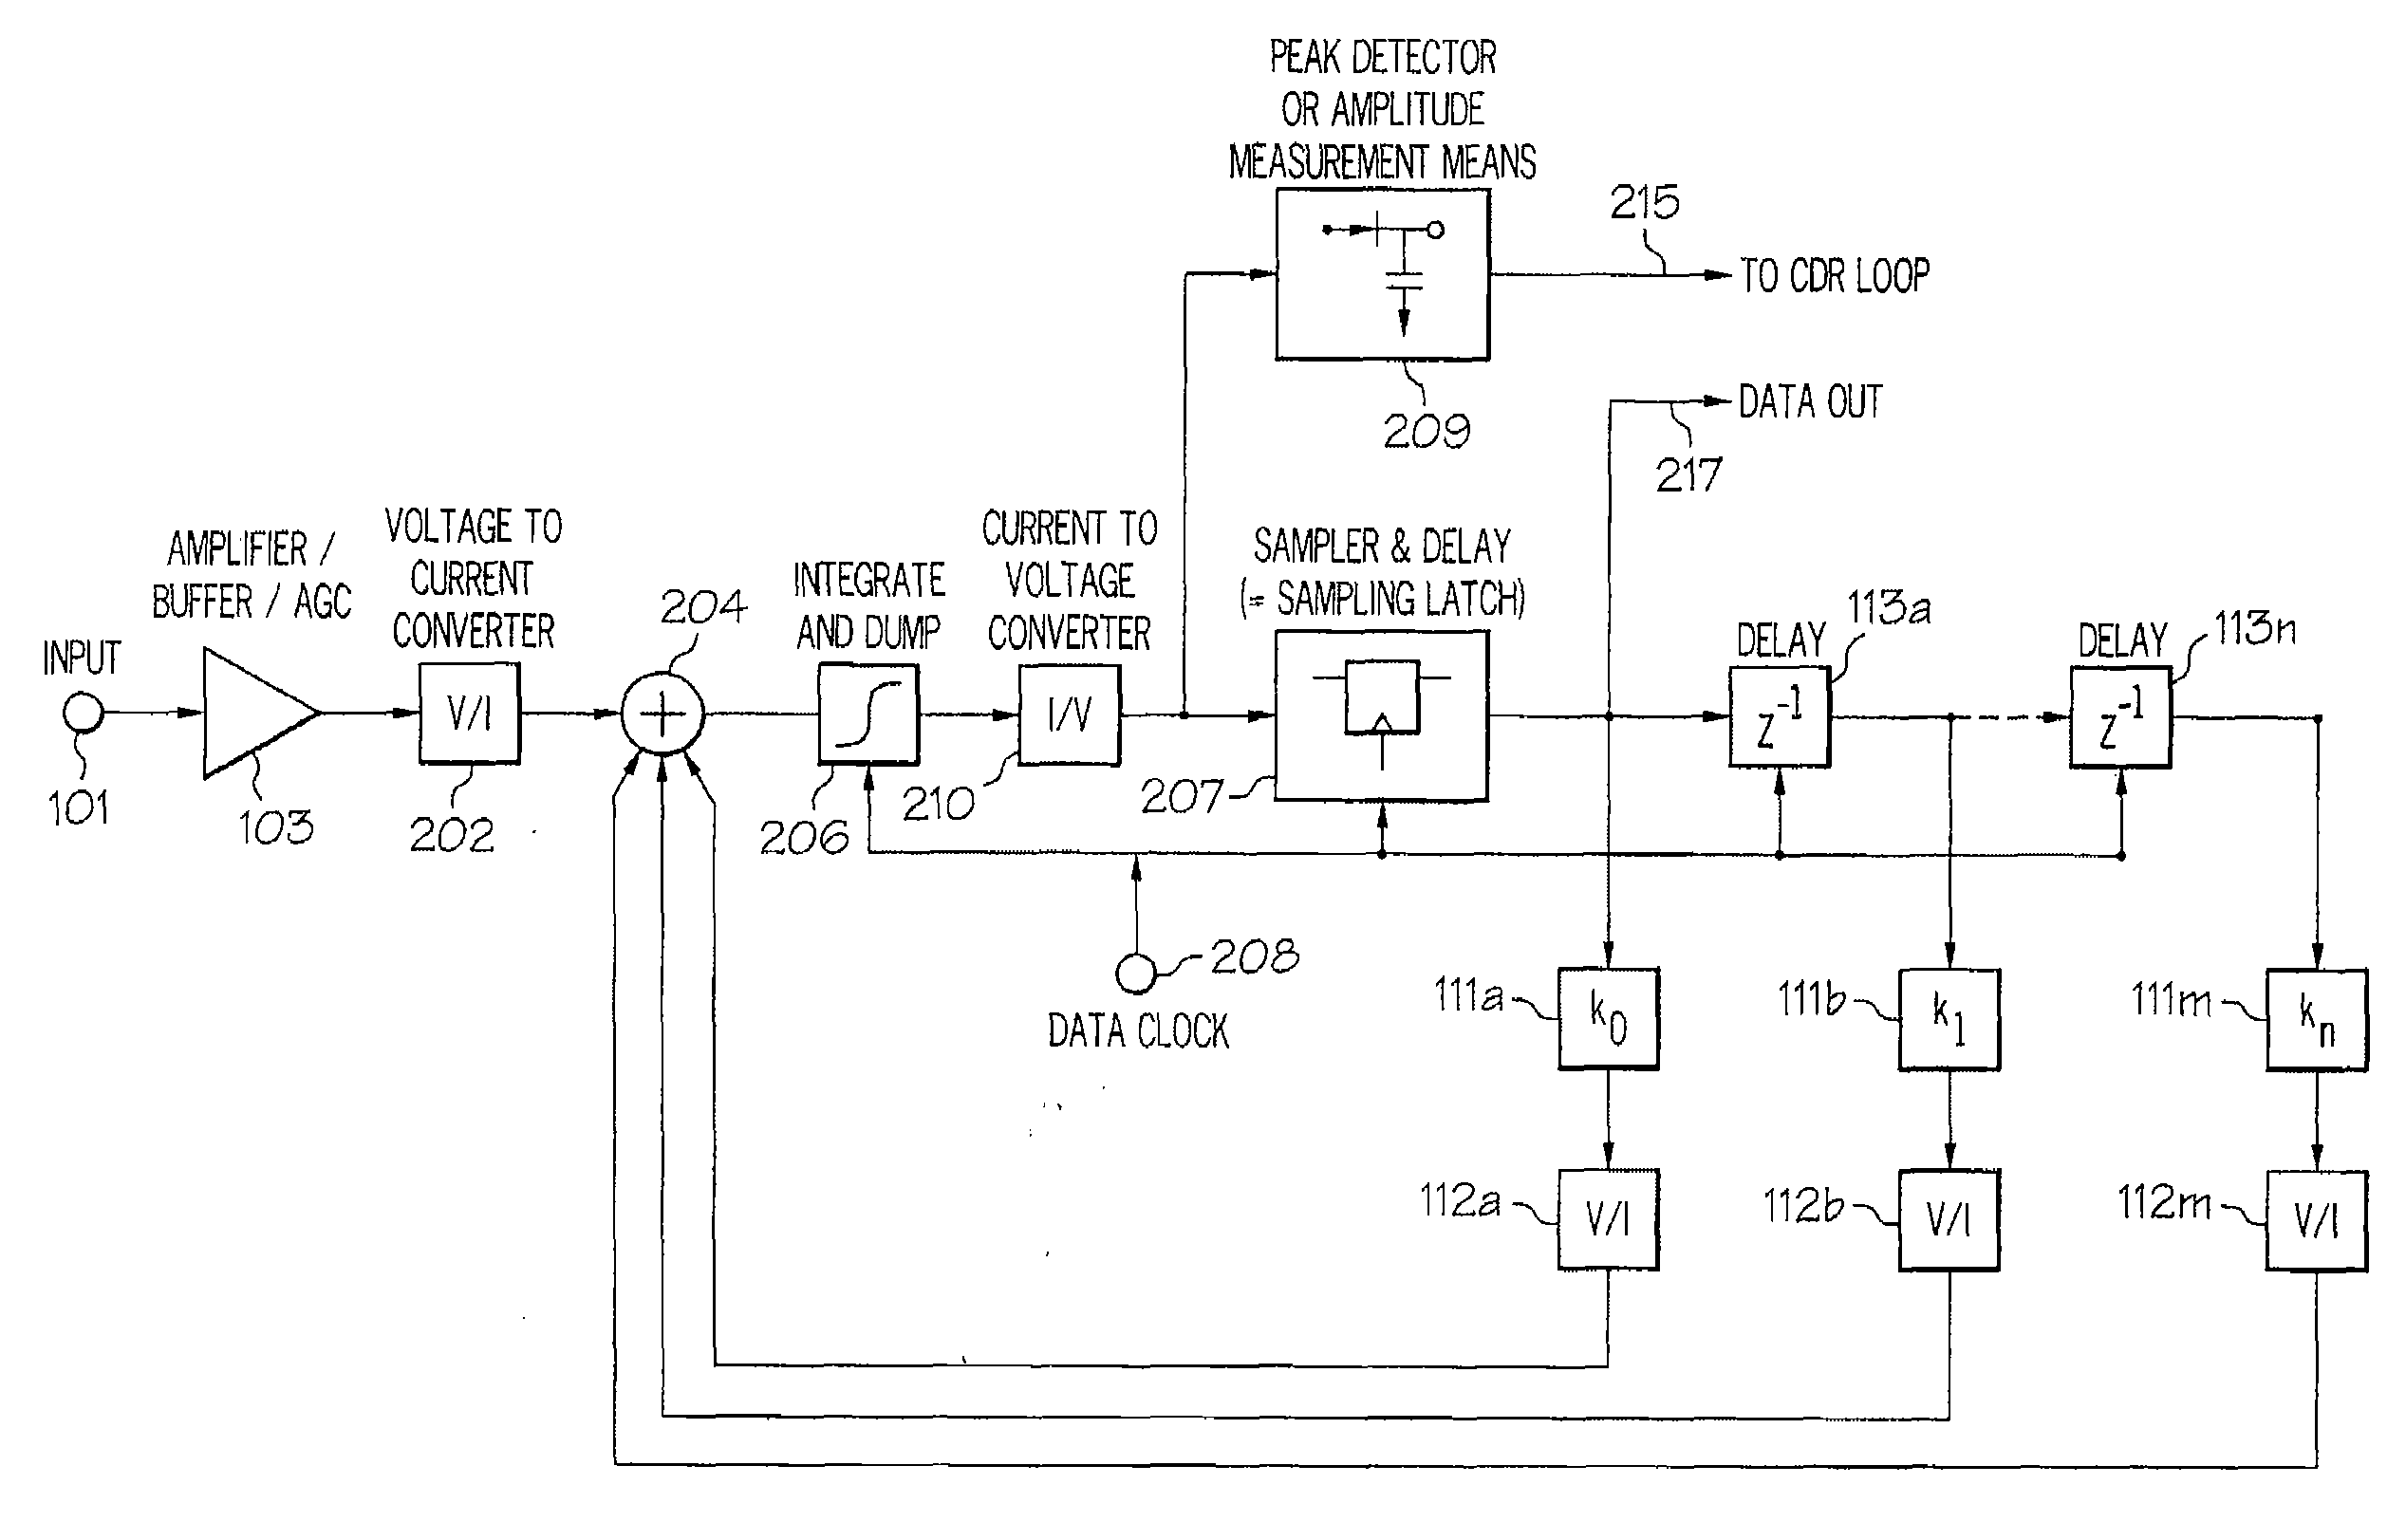 Structure for one-sample-per-bit decision feedback equalizer (DFE) clock and data recovery